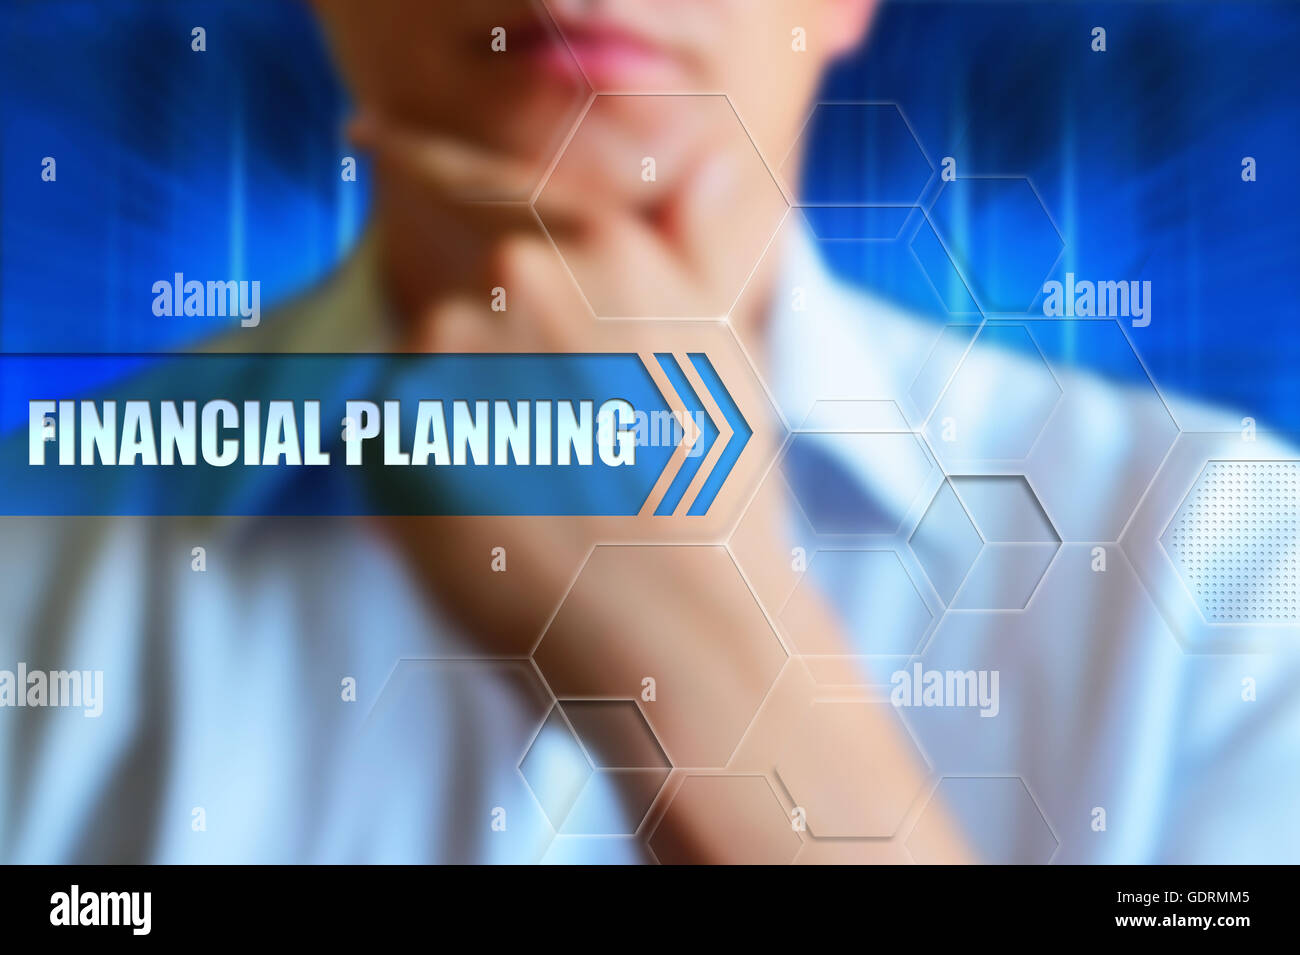 Financial planning concept Stock Photo